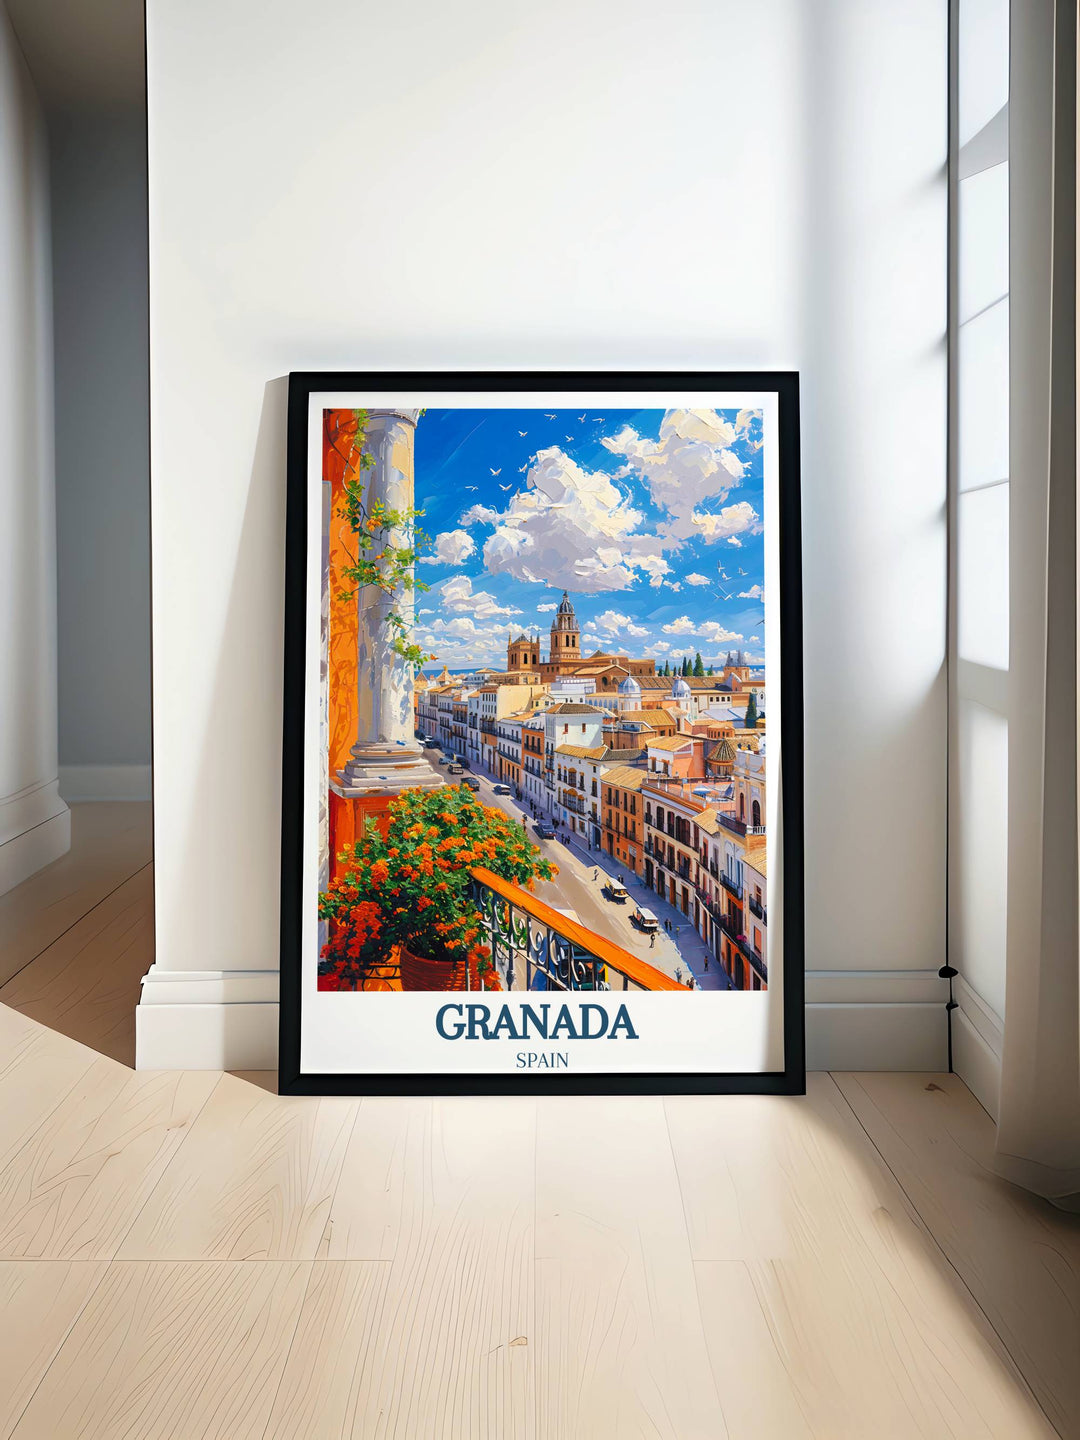 Immerse yourself in the charm of Granada with our captivating collection of Granada Art, perfect for adding Spanish flair to any space.